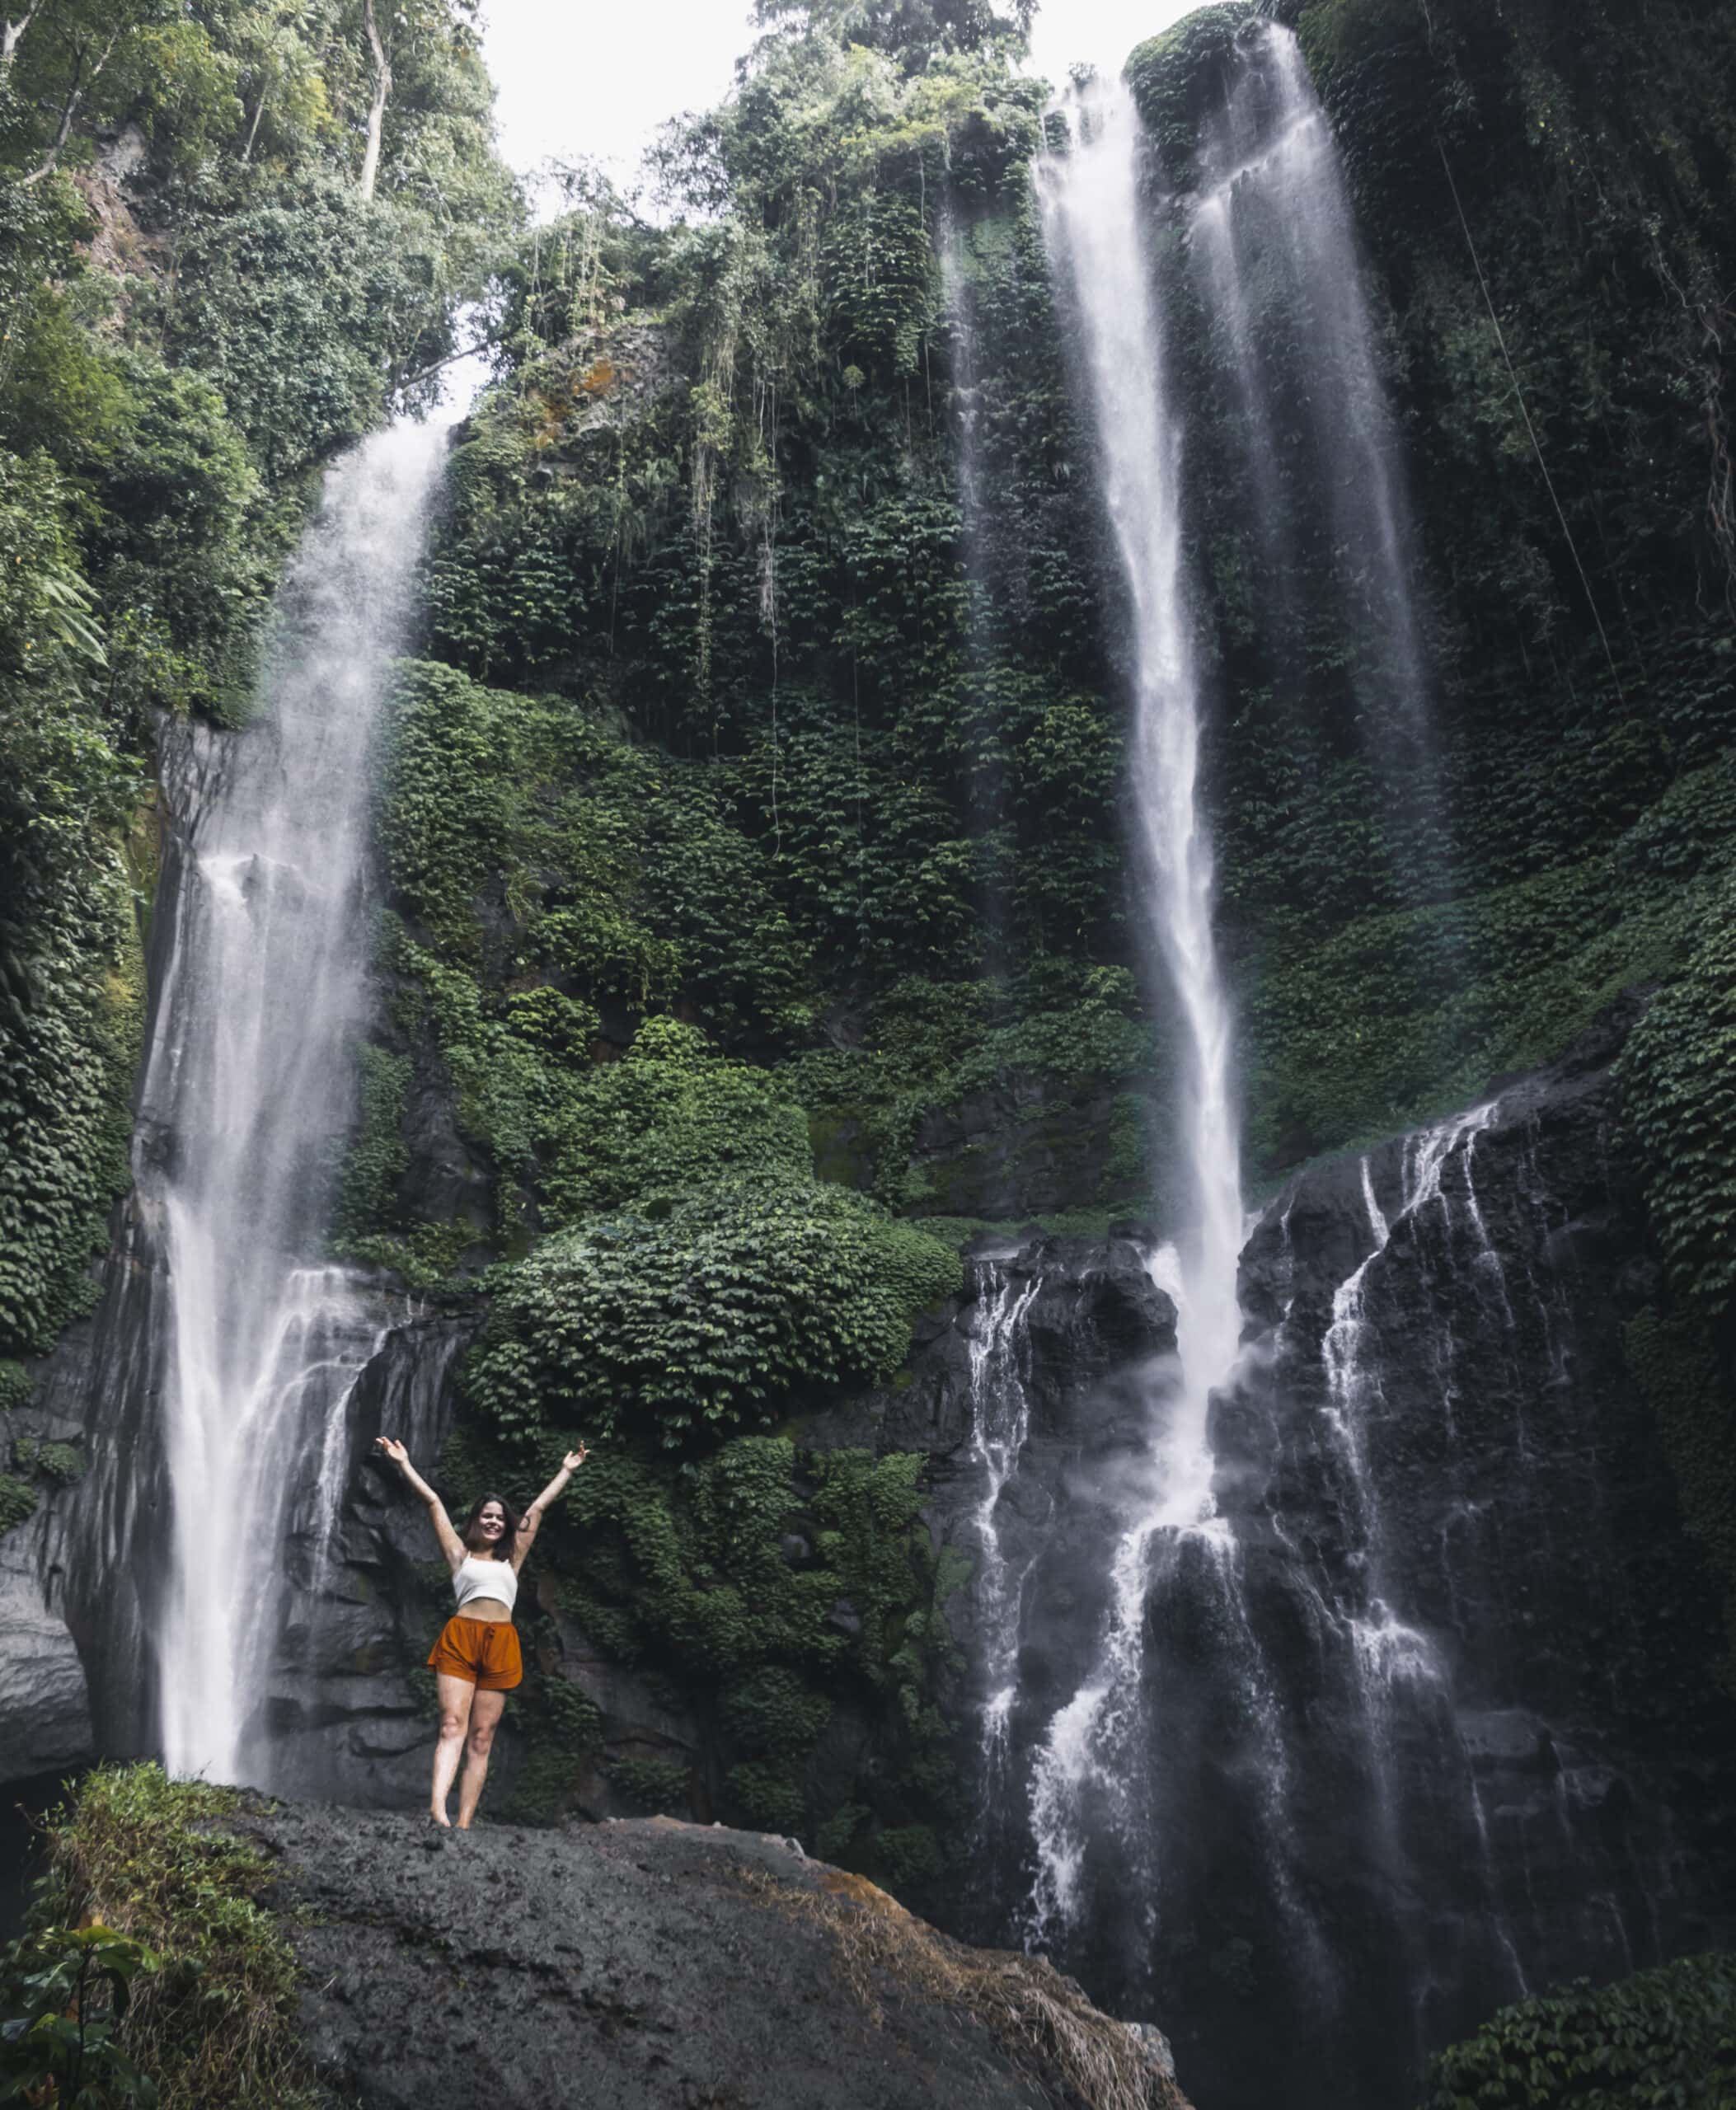 bali waterfalls - seeing new beautiful places makes you not want to go home after traveling